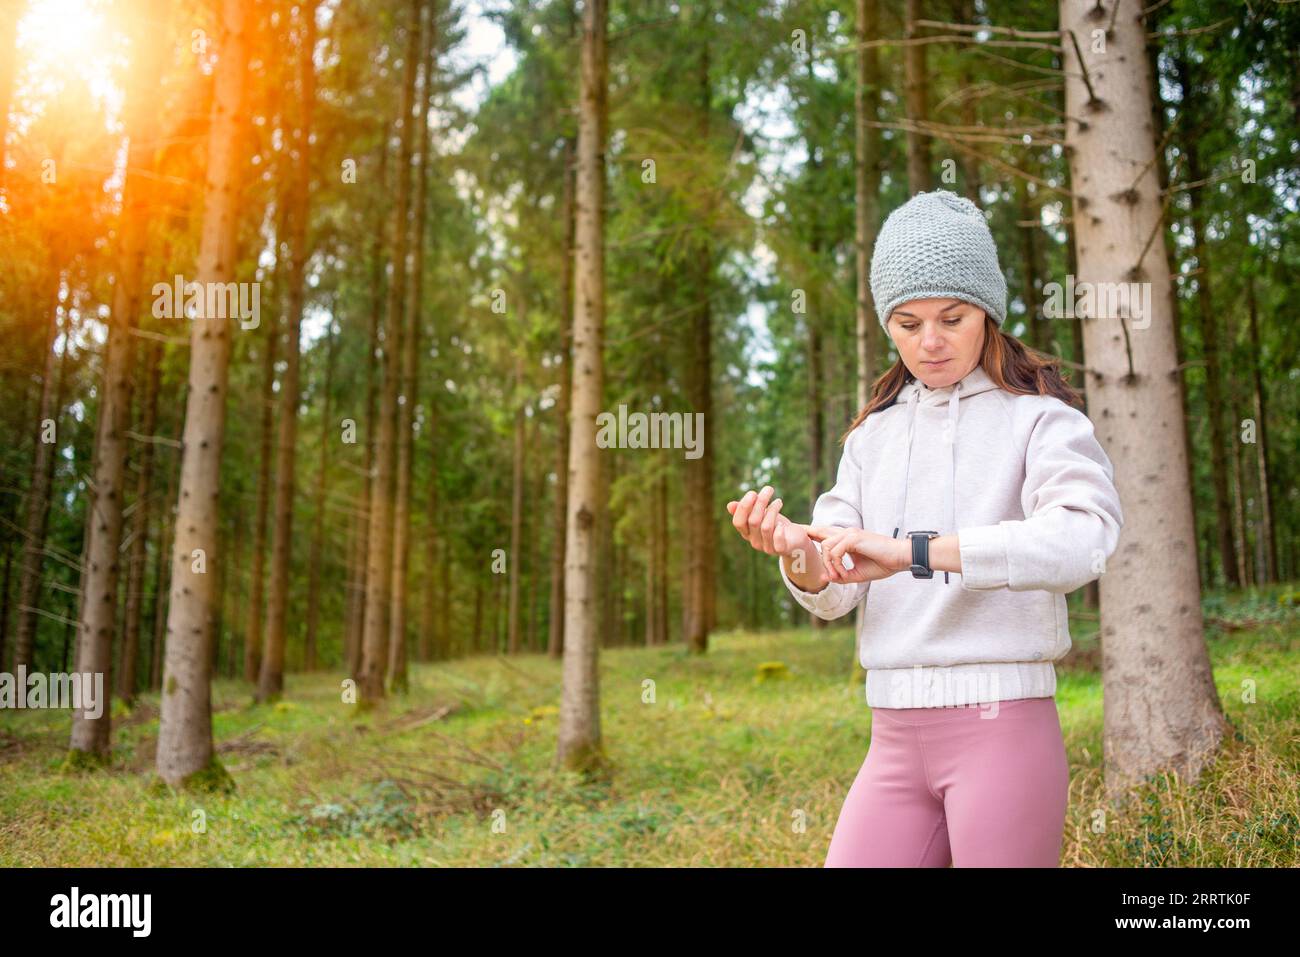 Fit sporty woman checking her smart watch fitness tracker, forest background. Stock Photo